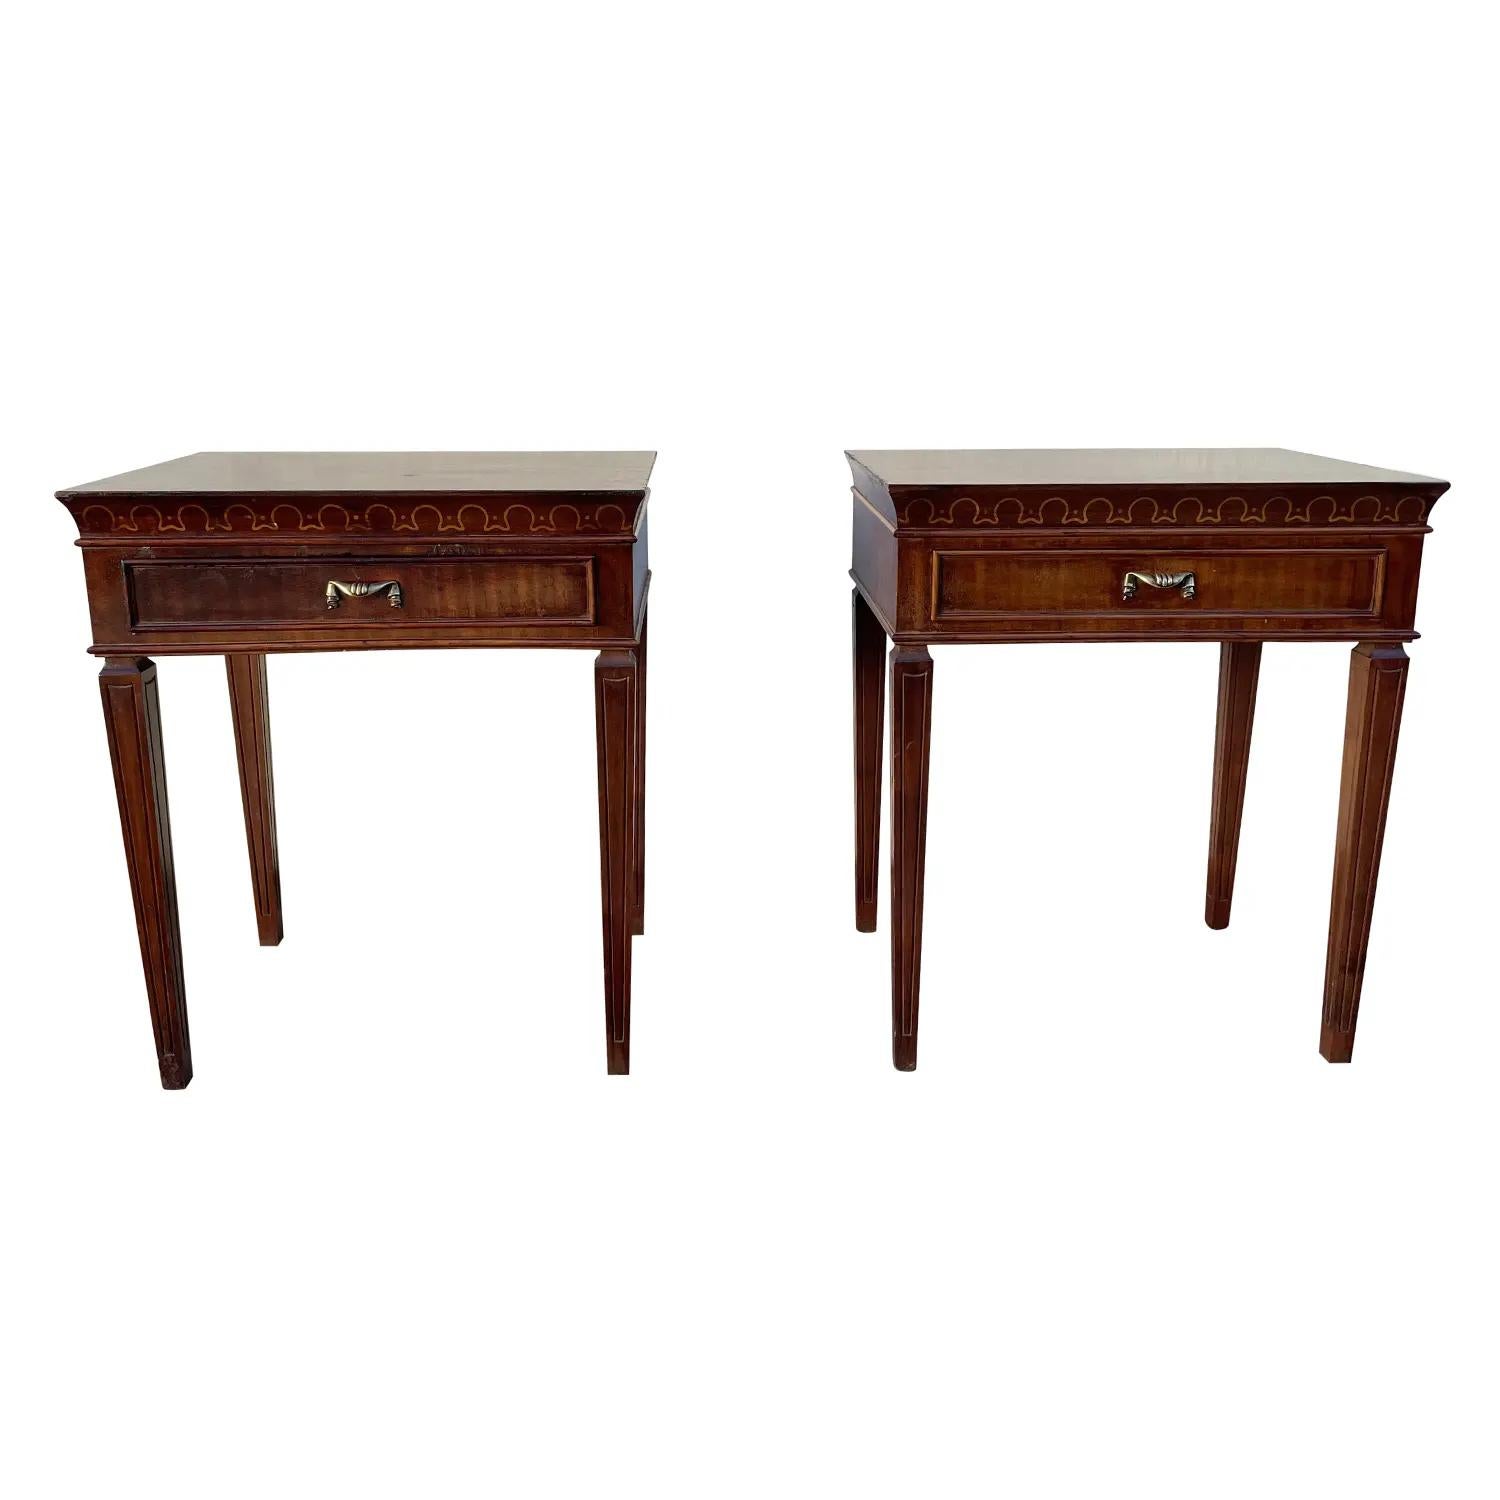 A light-brown, slim vintage Mid-Century modern Italian pair of nightstands, bedside tables made of hand carved Walnut with one small drawer composed with detailed brass pulls, handles. Designed by Paolo Buffa in good condition. The side tables are